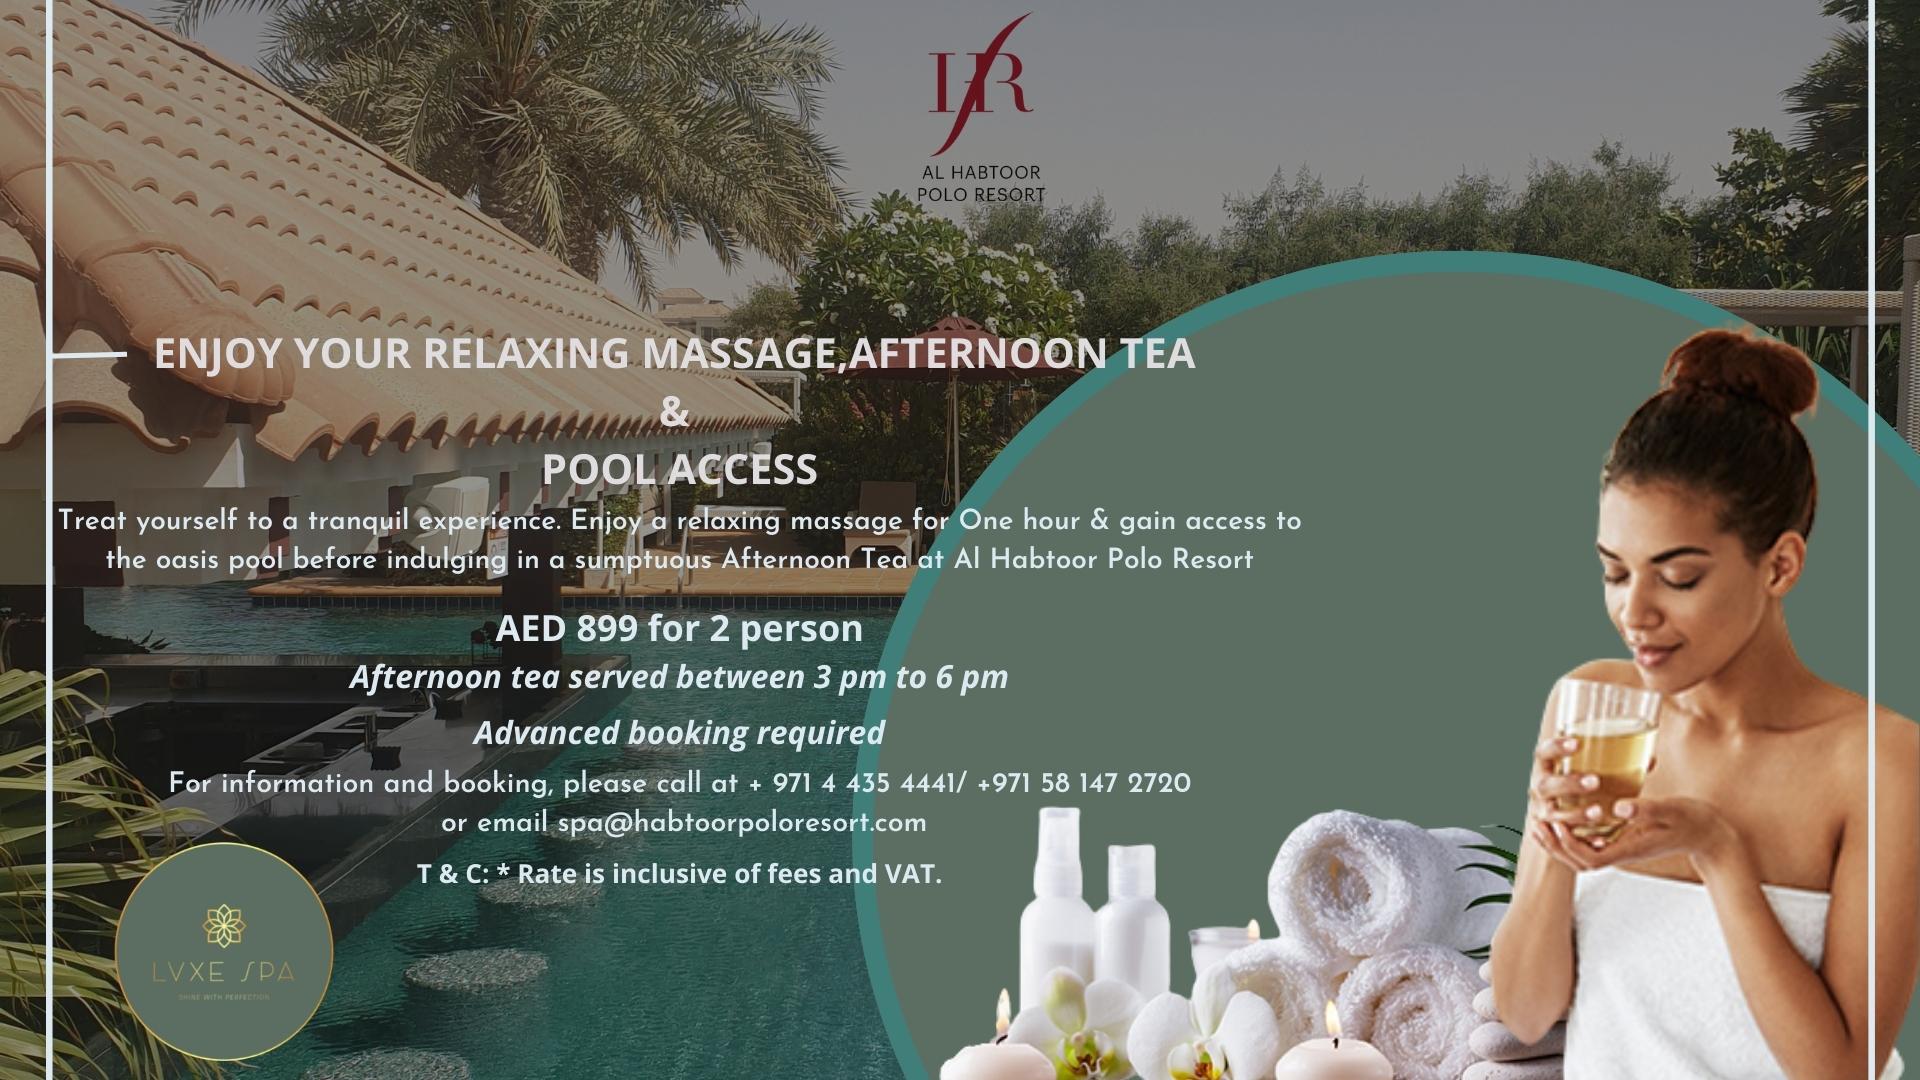 Relaxing massage, afternoon tea & Pool Access